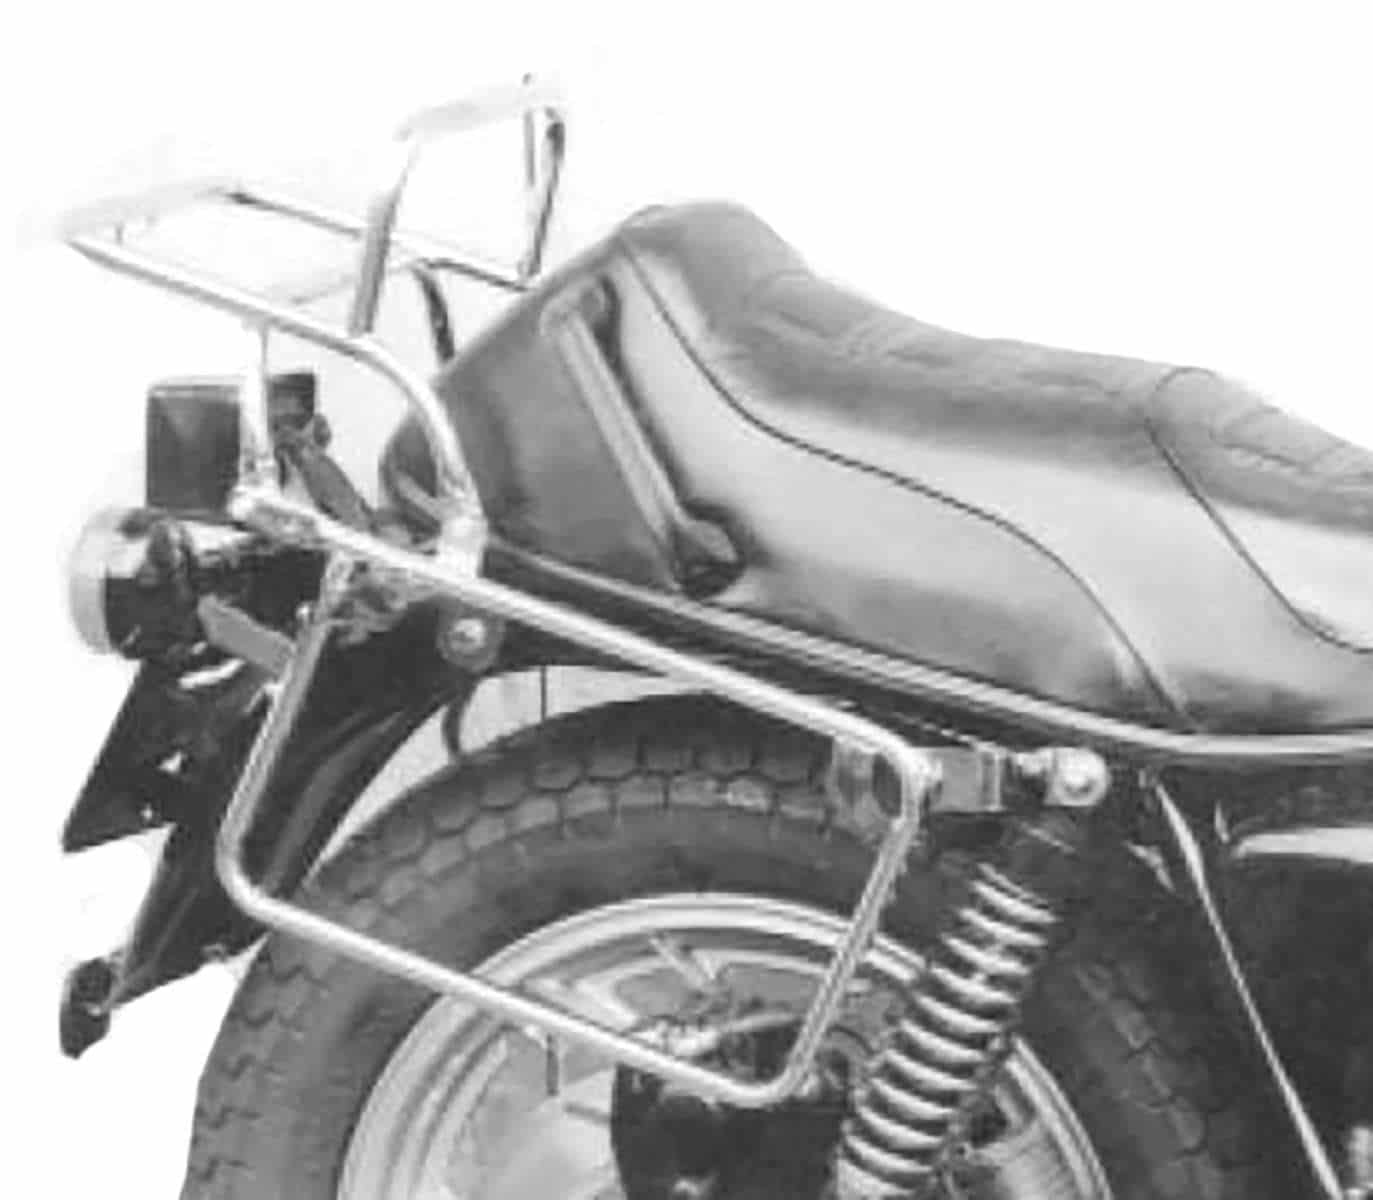 Complete carrier set (side- and topcase carrier) black for Yamaha XS 1100 S (1981-1982)